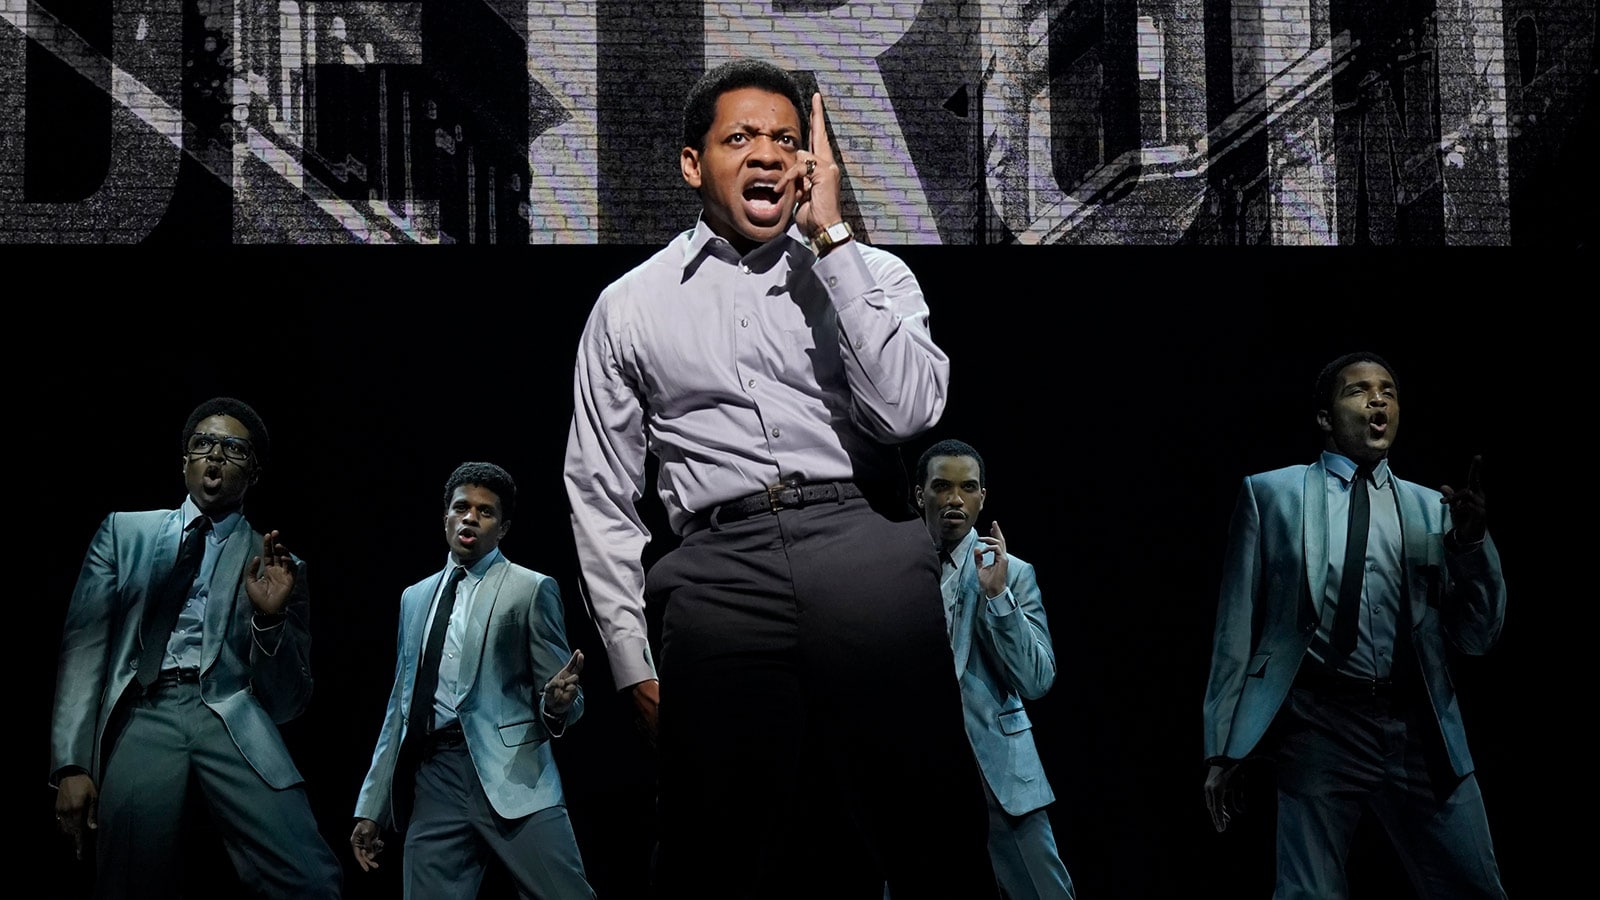 (foreground) Derrick Baskin (Otis Williams); (background, l to r) Ephraim Sykes (David Ruffin), Jeremy Pope (Eddie Kendricks), Jared Joseph (Melvin Franklin), and James Harkness (Paul Williams) in the world premiere of <em>Ain’t Too Proud—The Life and Times of The Temptations</em> at Berkeley Repertory Theatre.